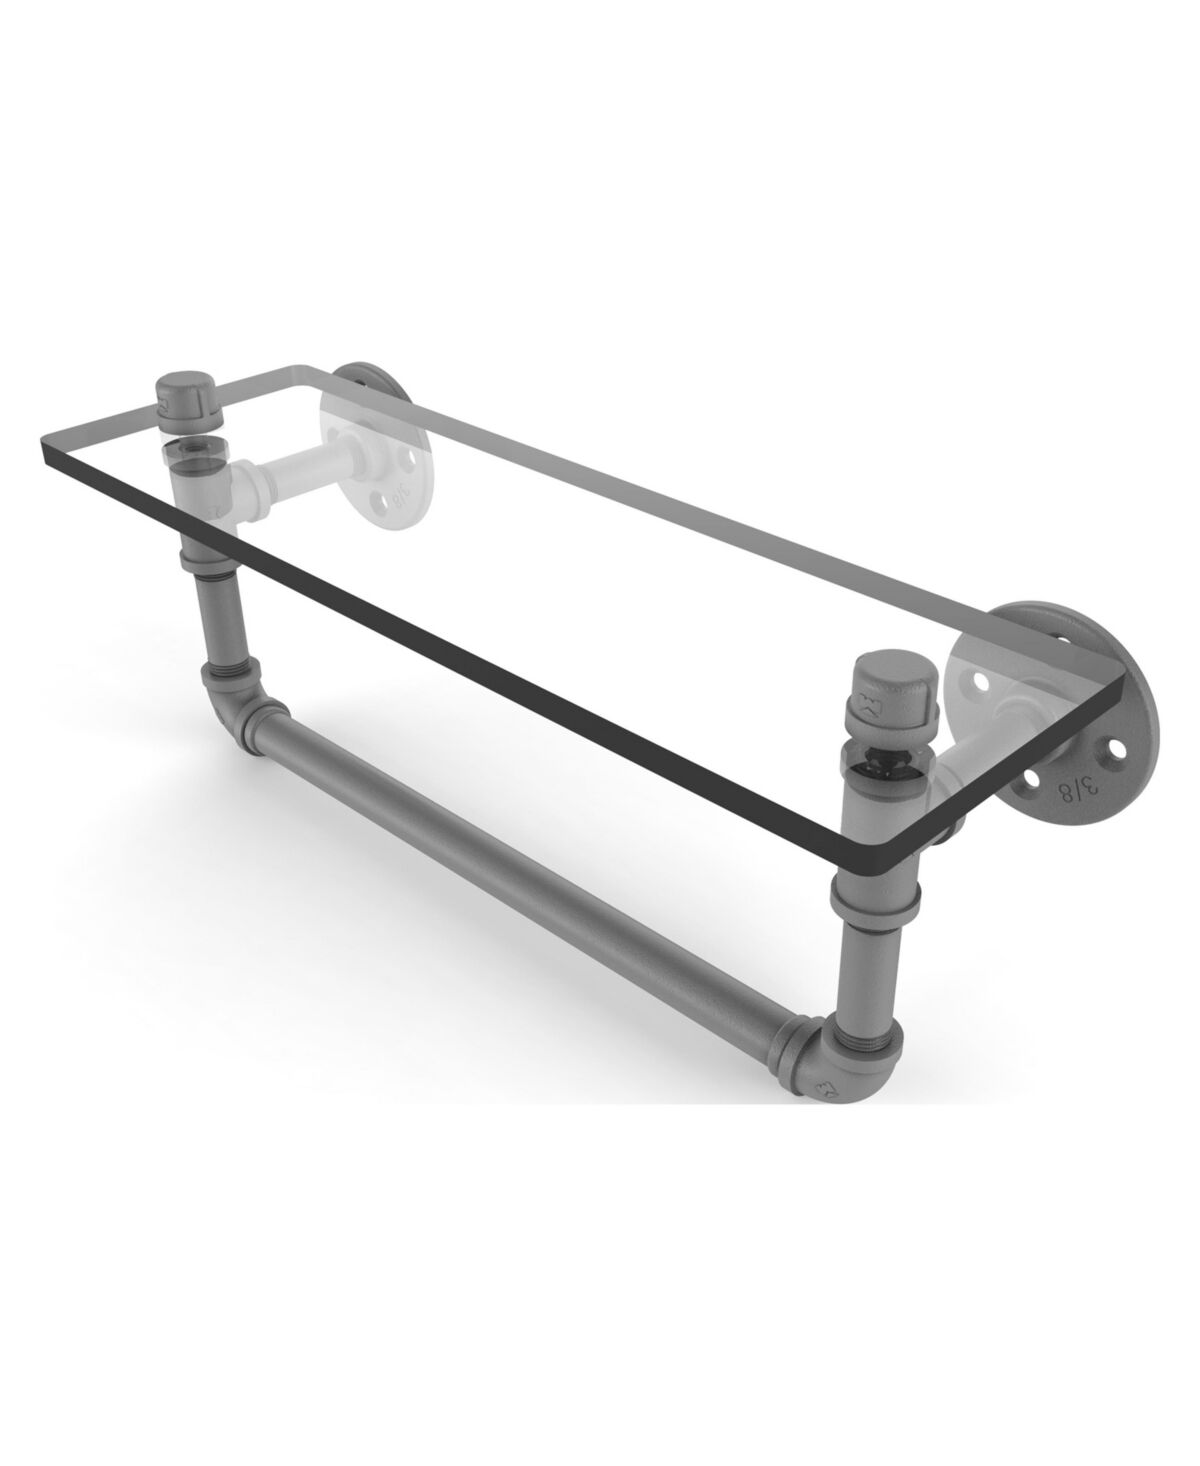 Allied Pipeline Collection 16 Inch Glass Shelf with Towel Bar - Matte gray